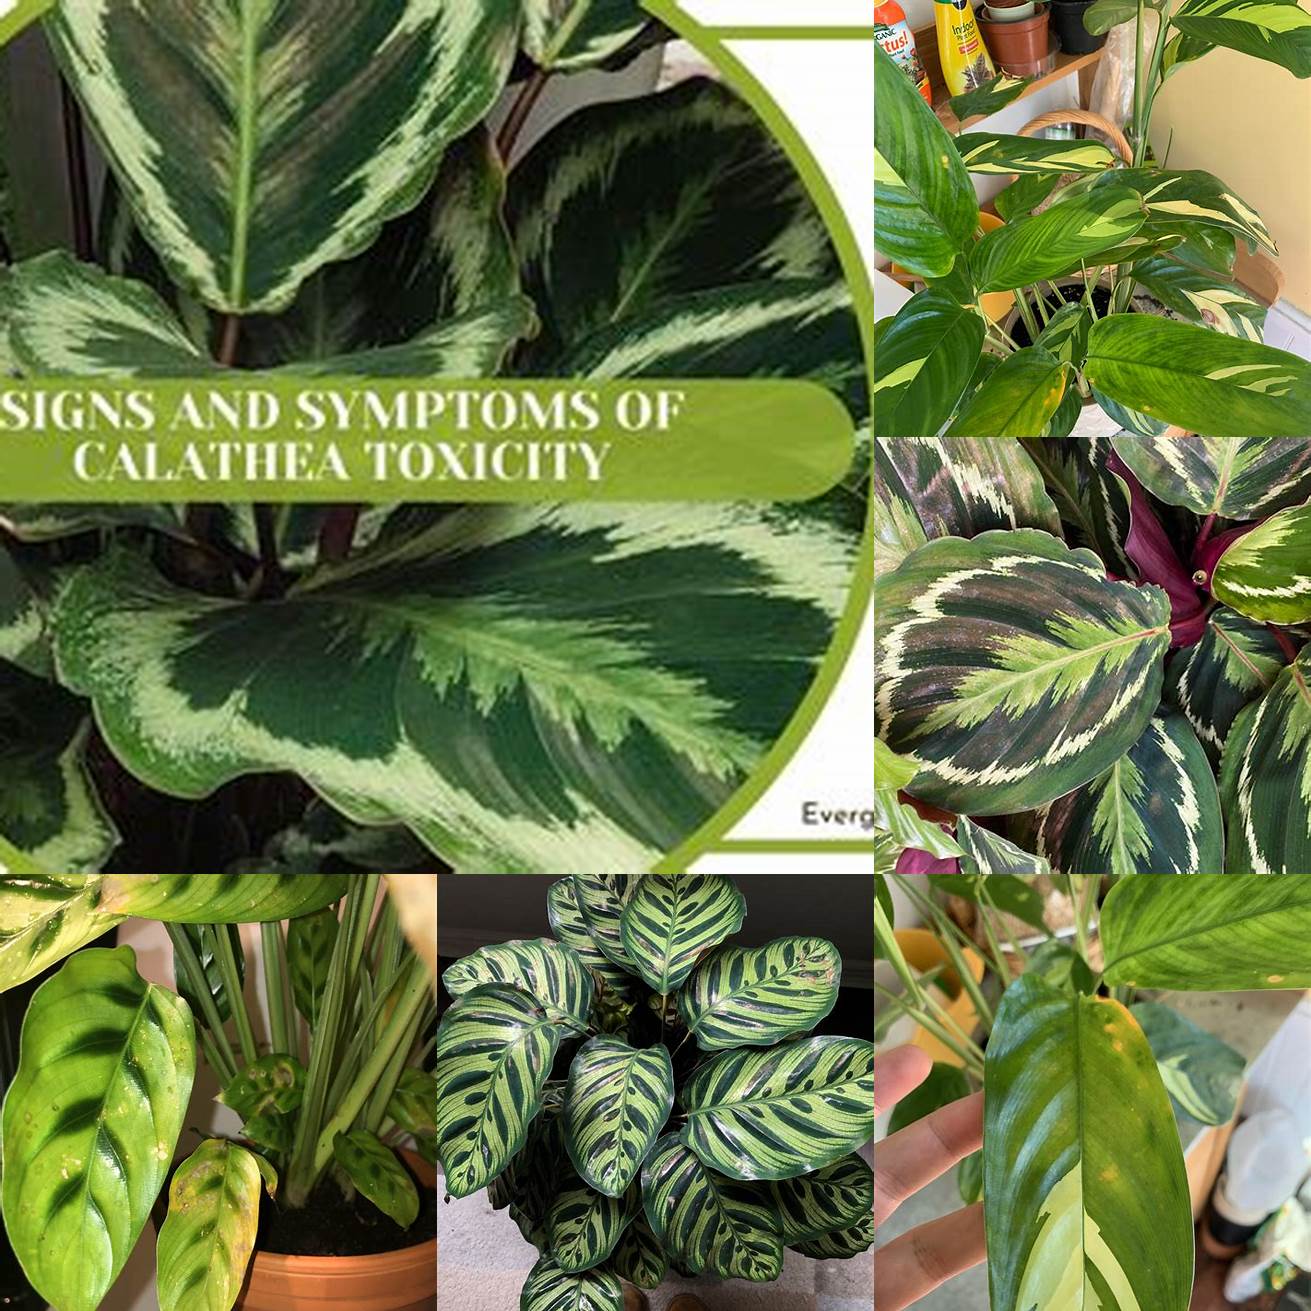 Q Can Calathea poisoning be treated A Yes Calathea poisoning can be treated if caught early Its important to seek veterinary care as soon as possible